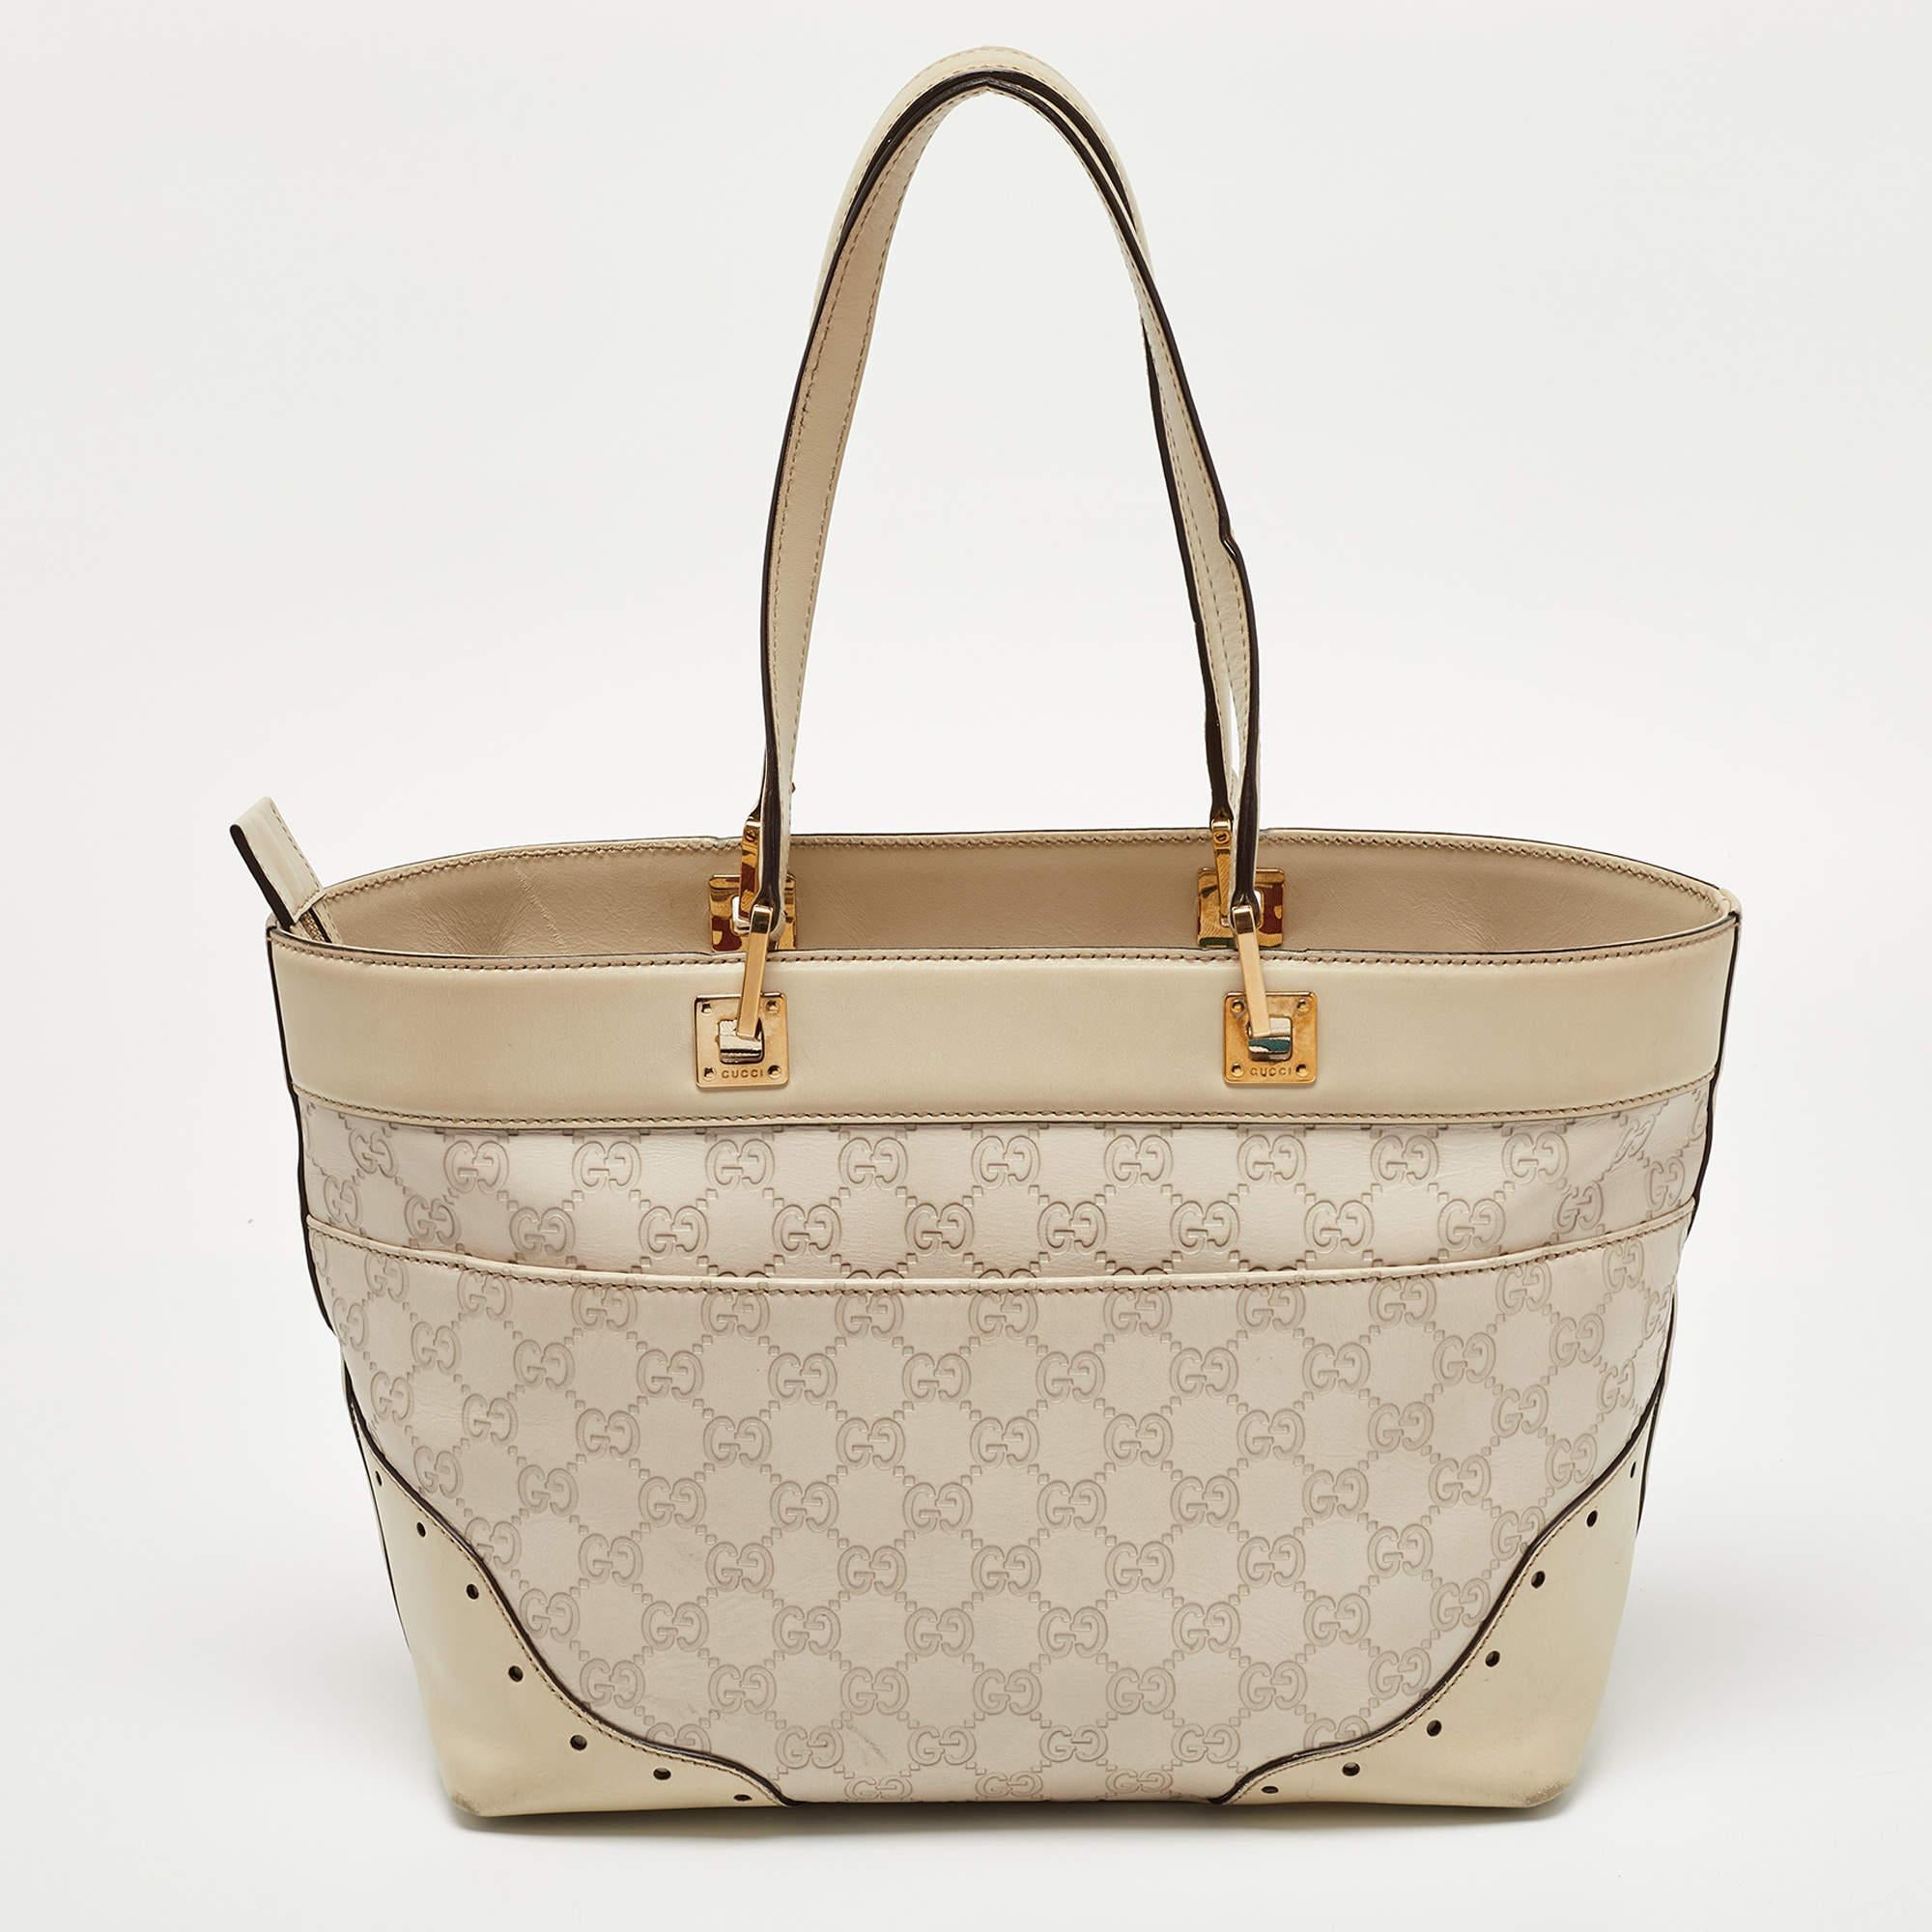 This Gucci tote for women is super classy and functional, perfect for everyday use. We like the simple details and its high-quality finish.

